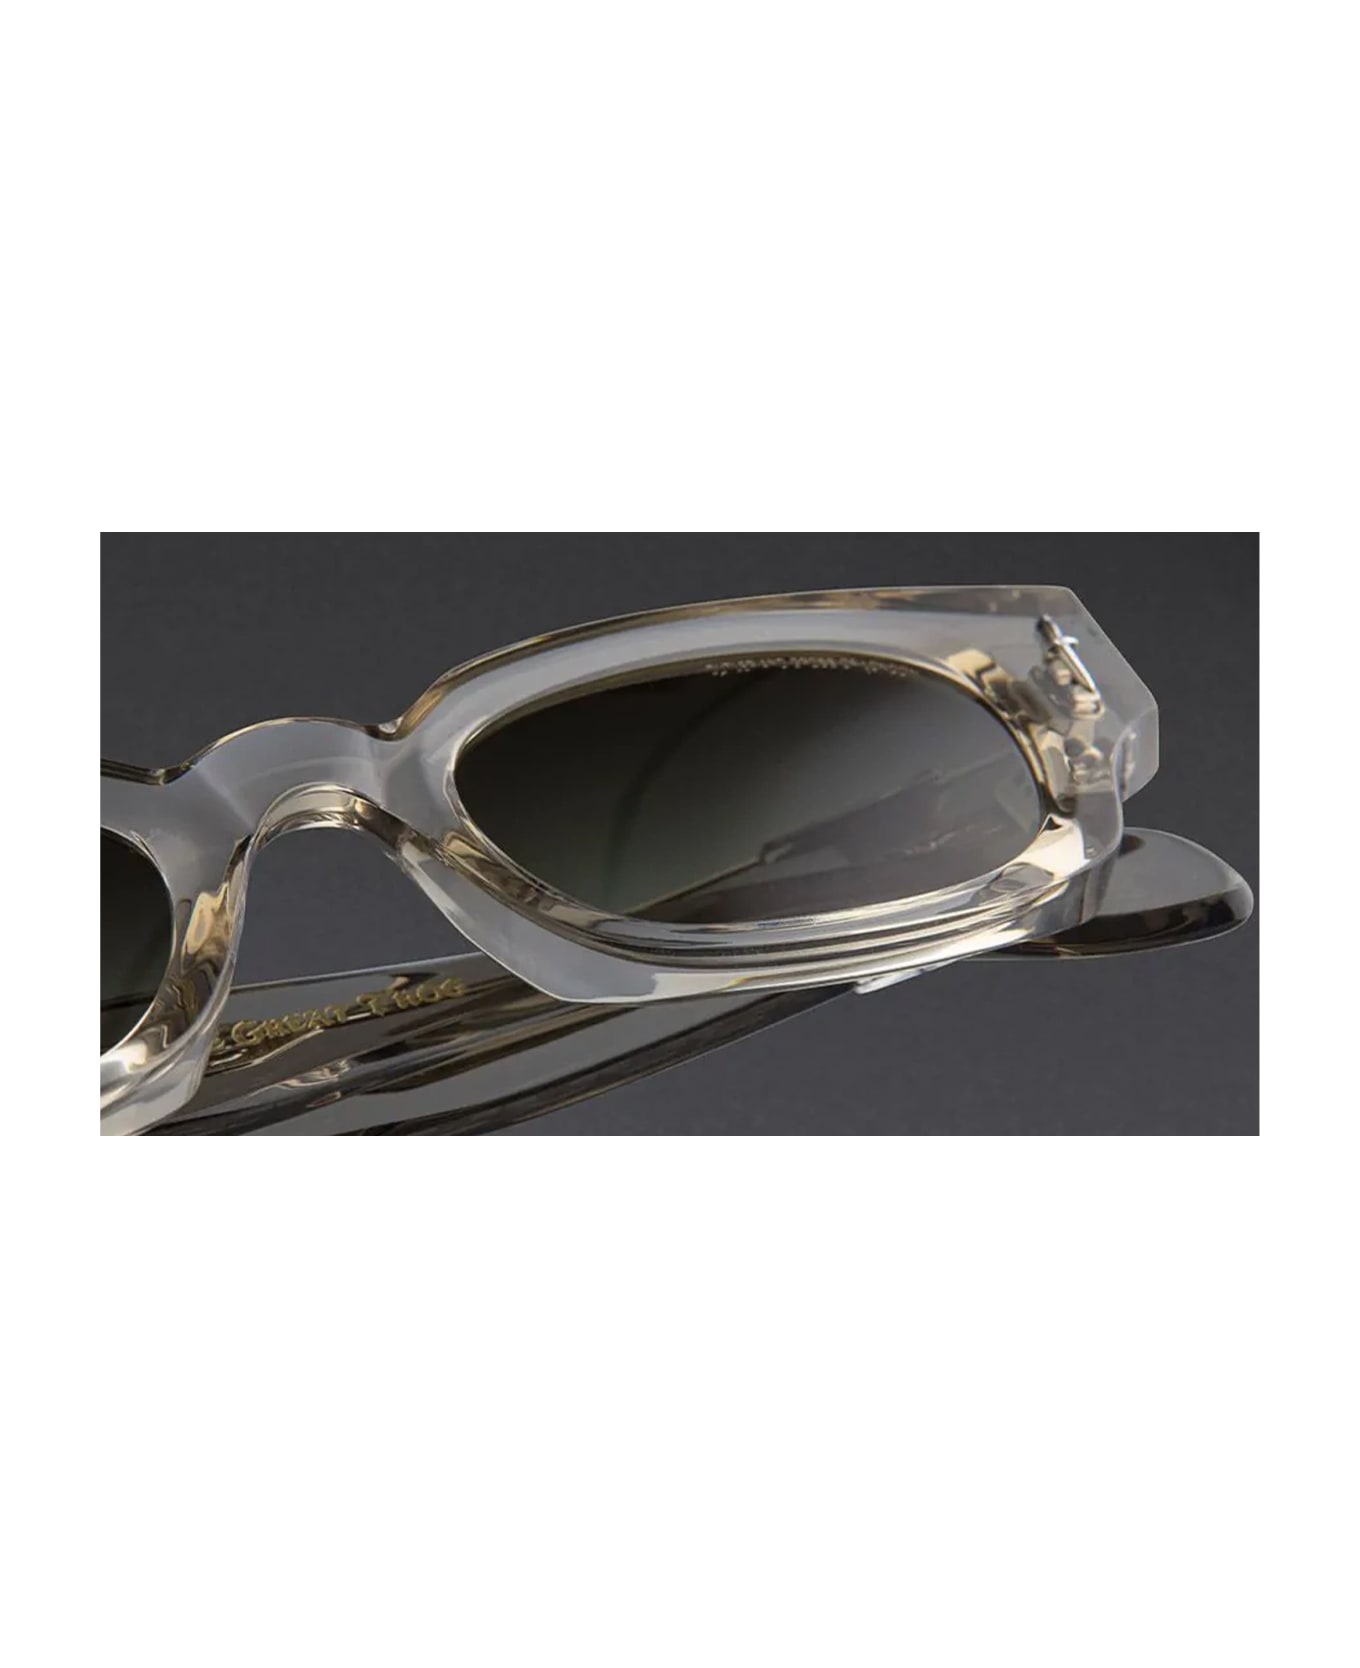 Cutler and Gross The Great Frog - Soaring Eagle / Sand Crystal Sunglasses - transparent beige